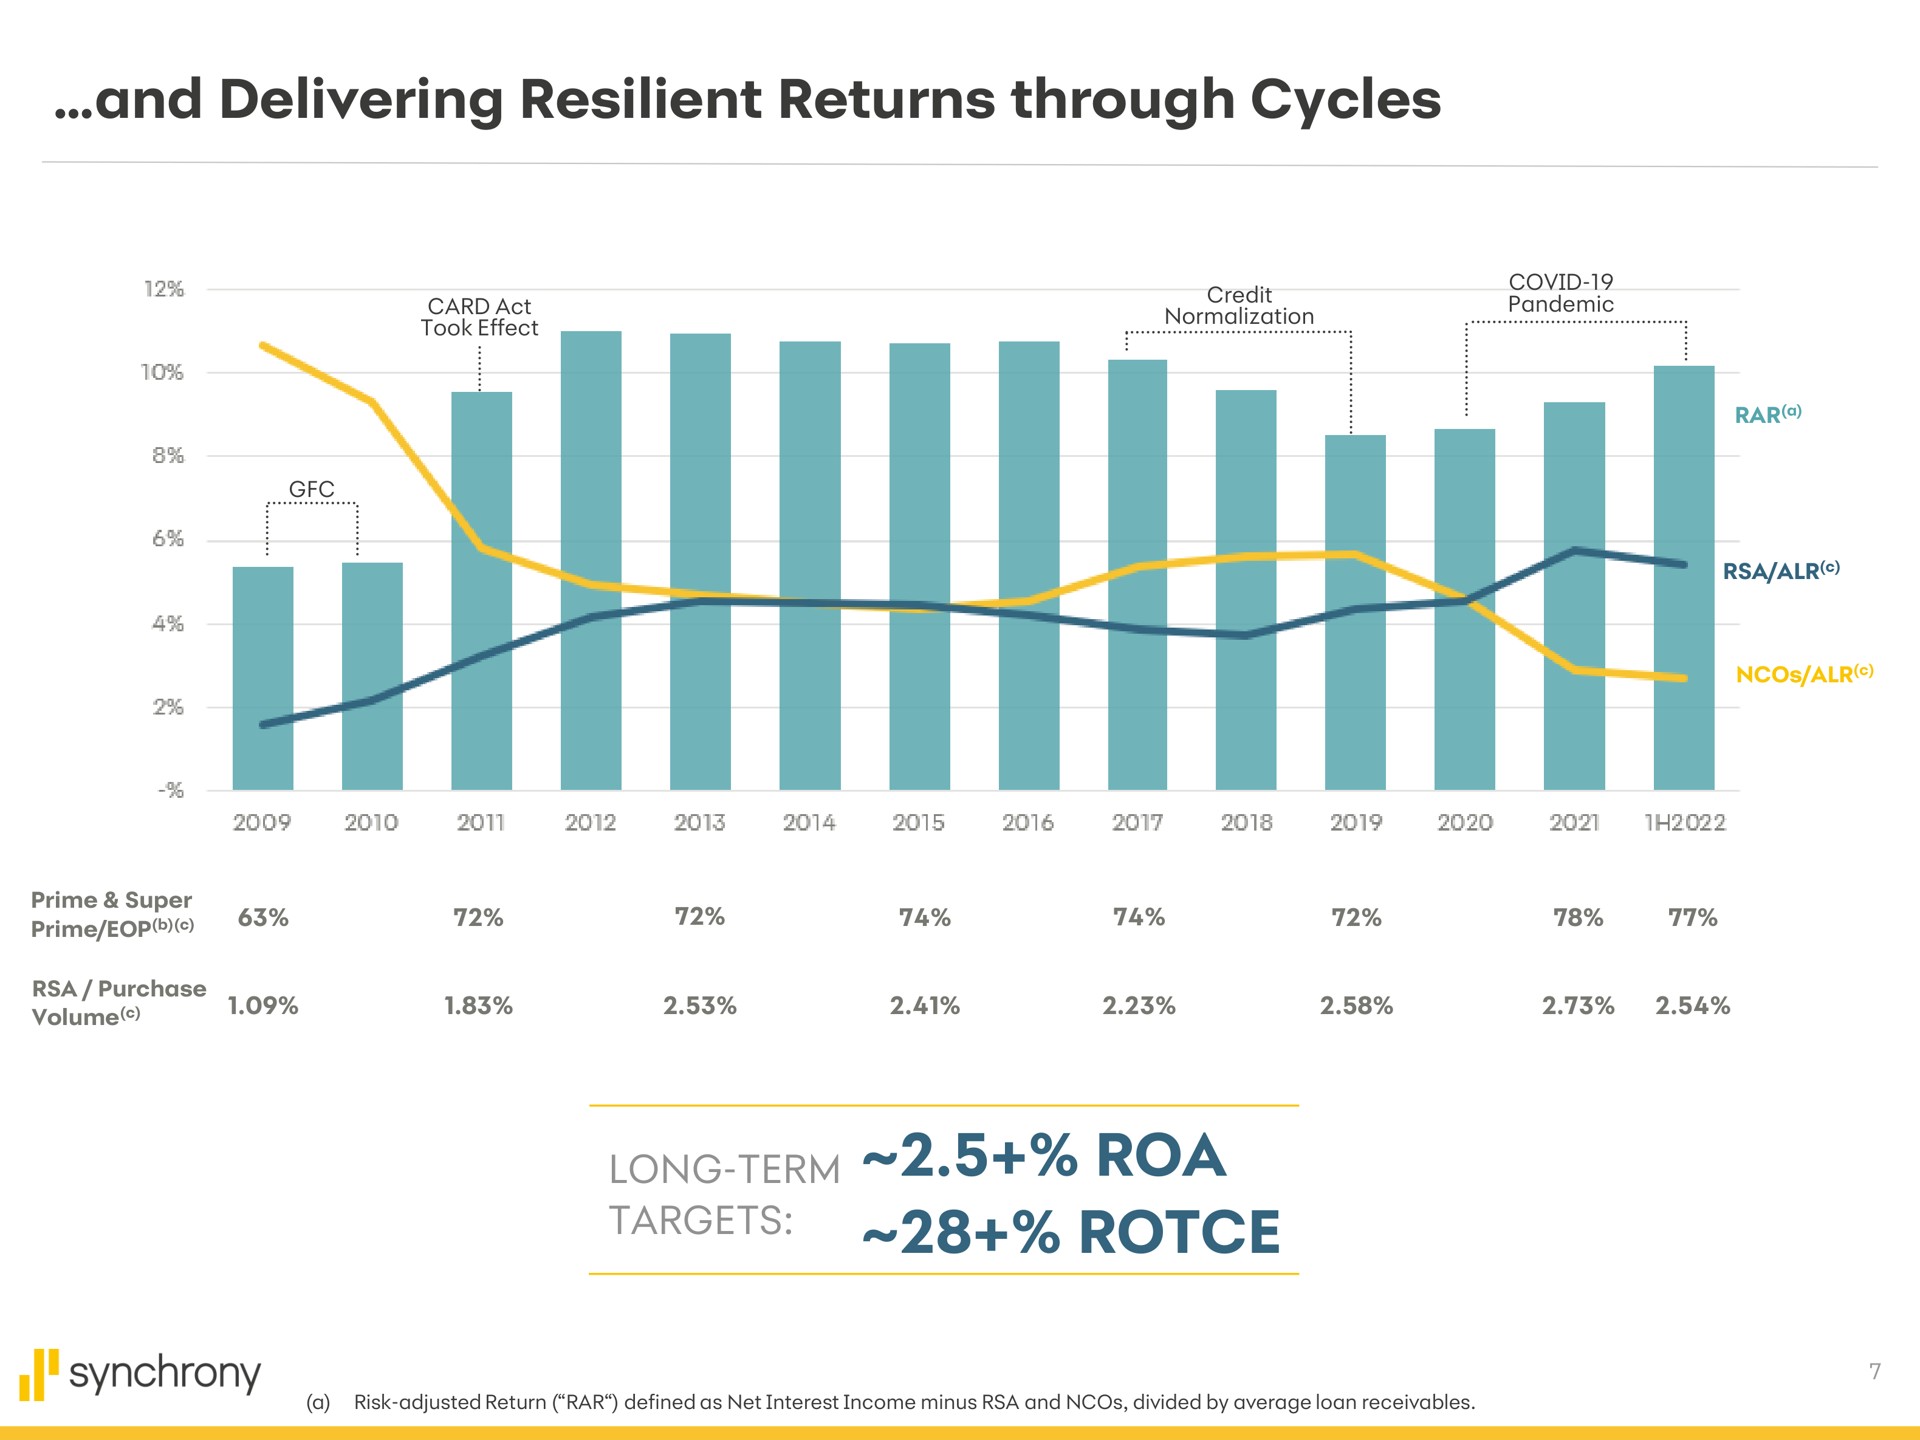 and delivering resilient returns through cycles long term targets cee i | Synchrony Financial